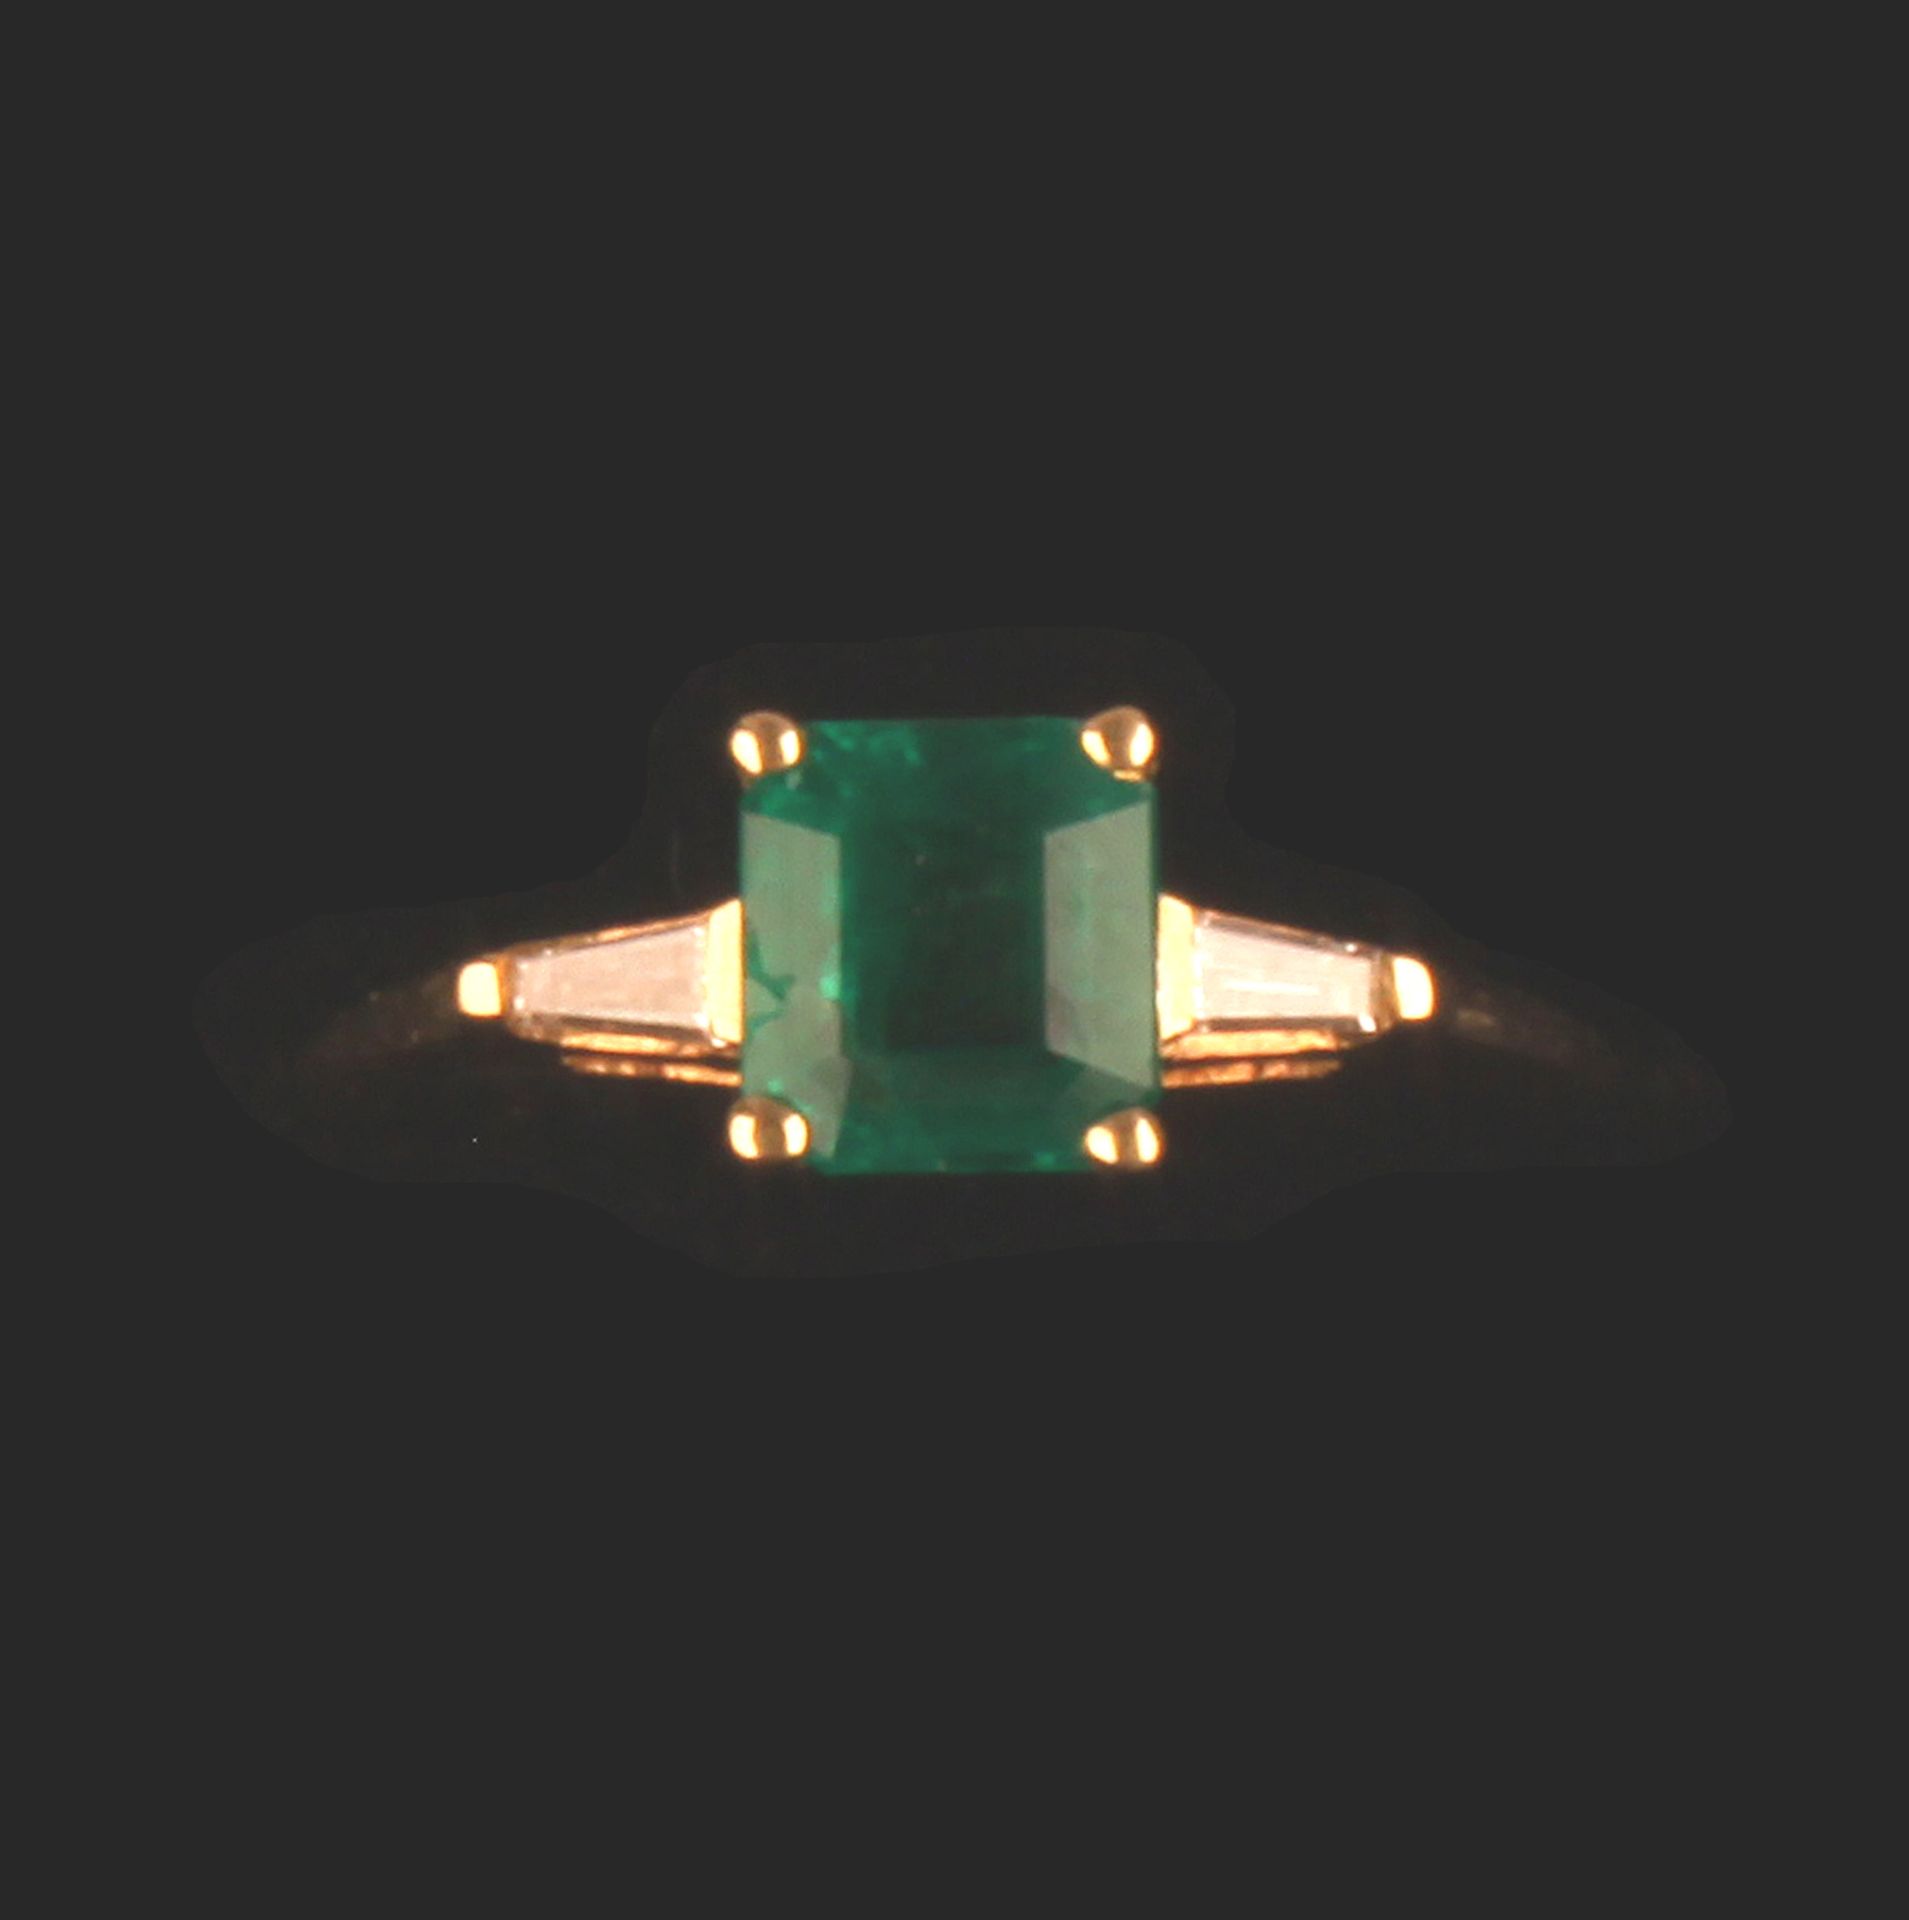 14ct GOLD RING SET WITH LARGE SQ CUT EMERALD & 2 X TAPERED BAGUETTE DIAMONDS - Image 3 of 4